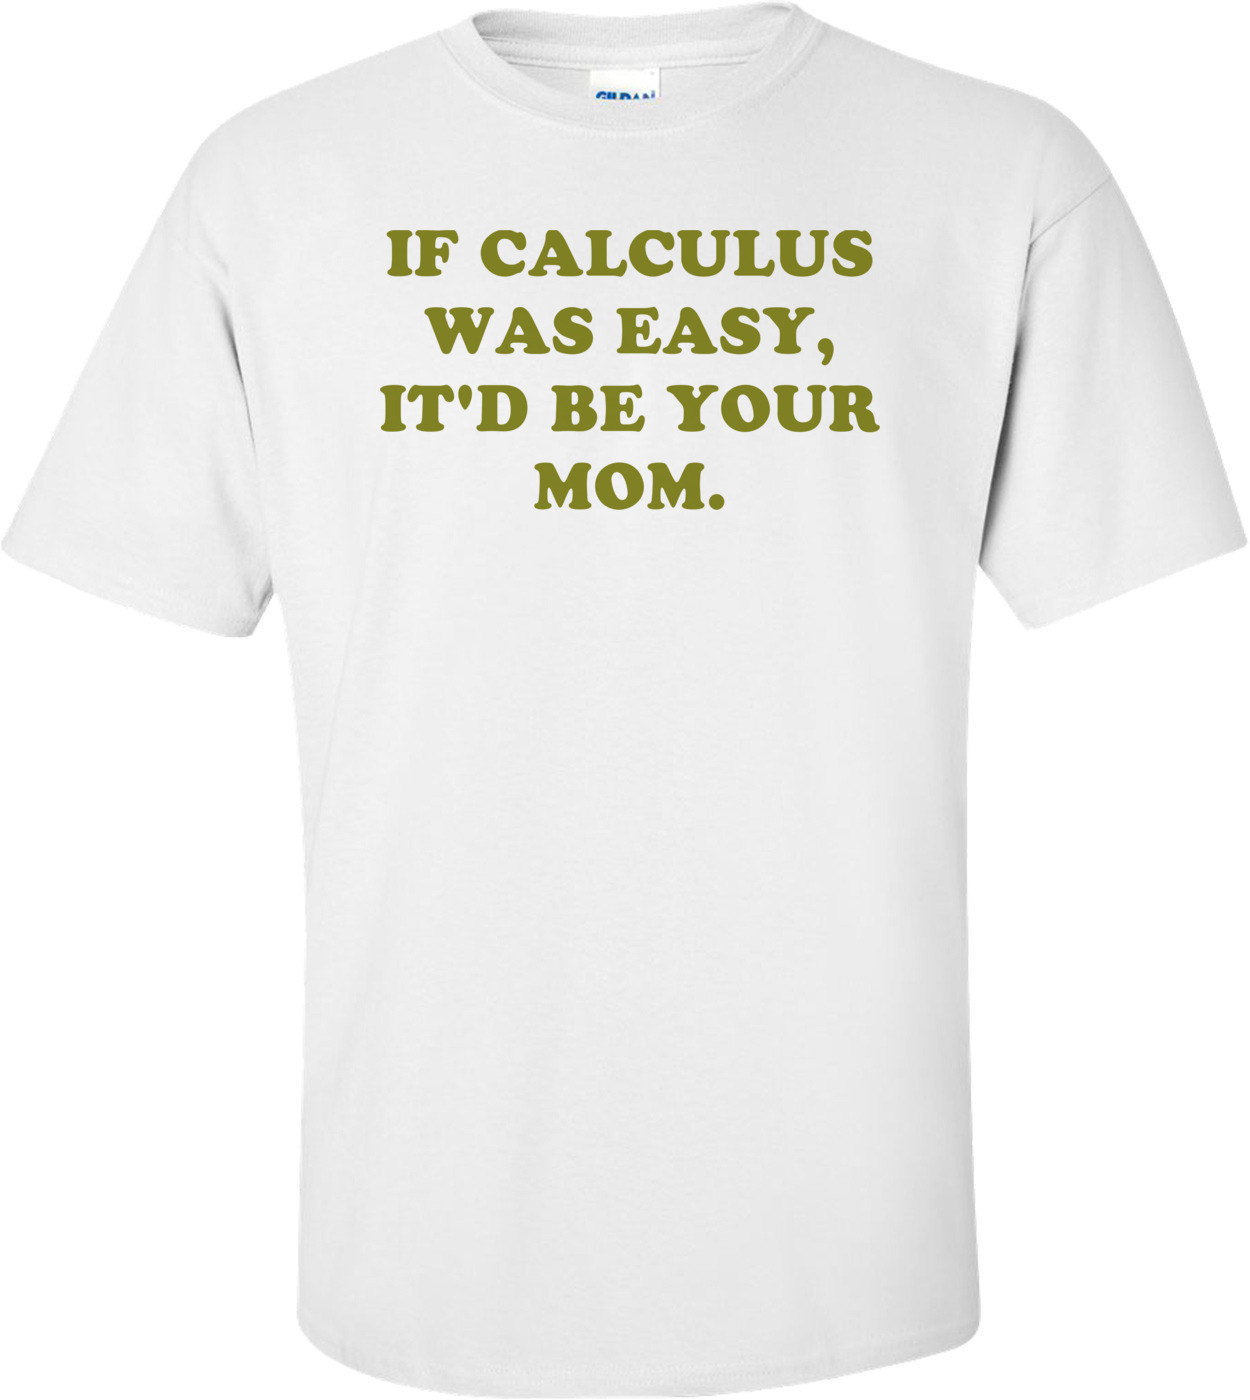 IF CALCULUS WAS EASY, IT'D BE YOUR MOM.